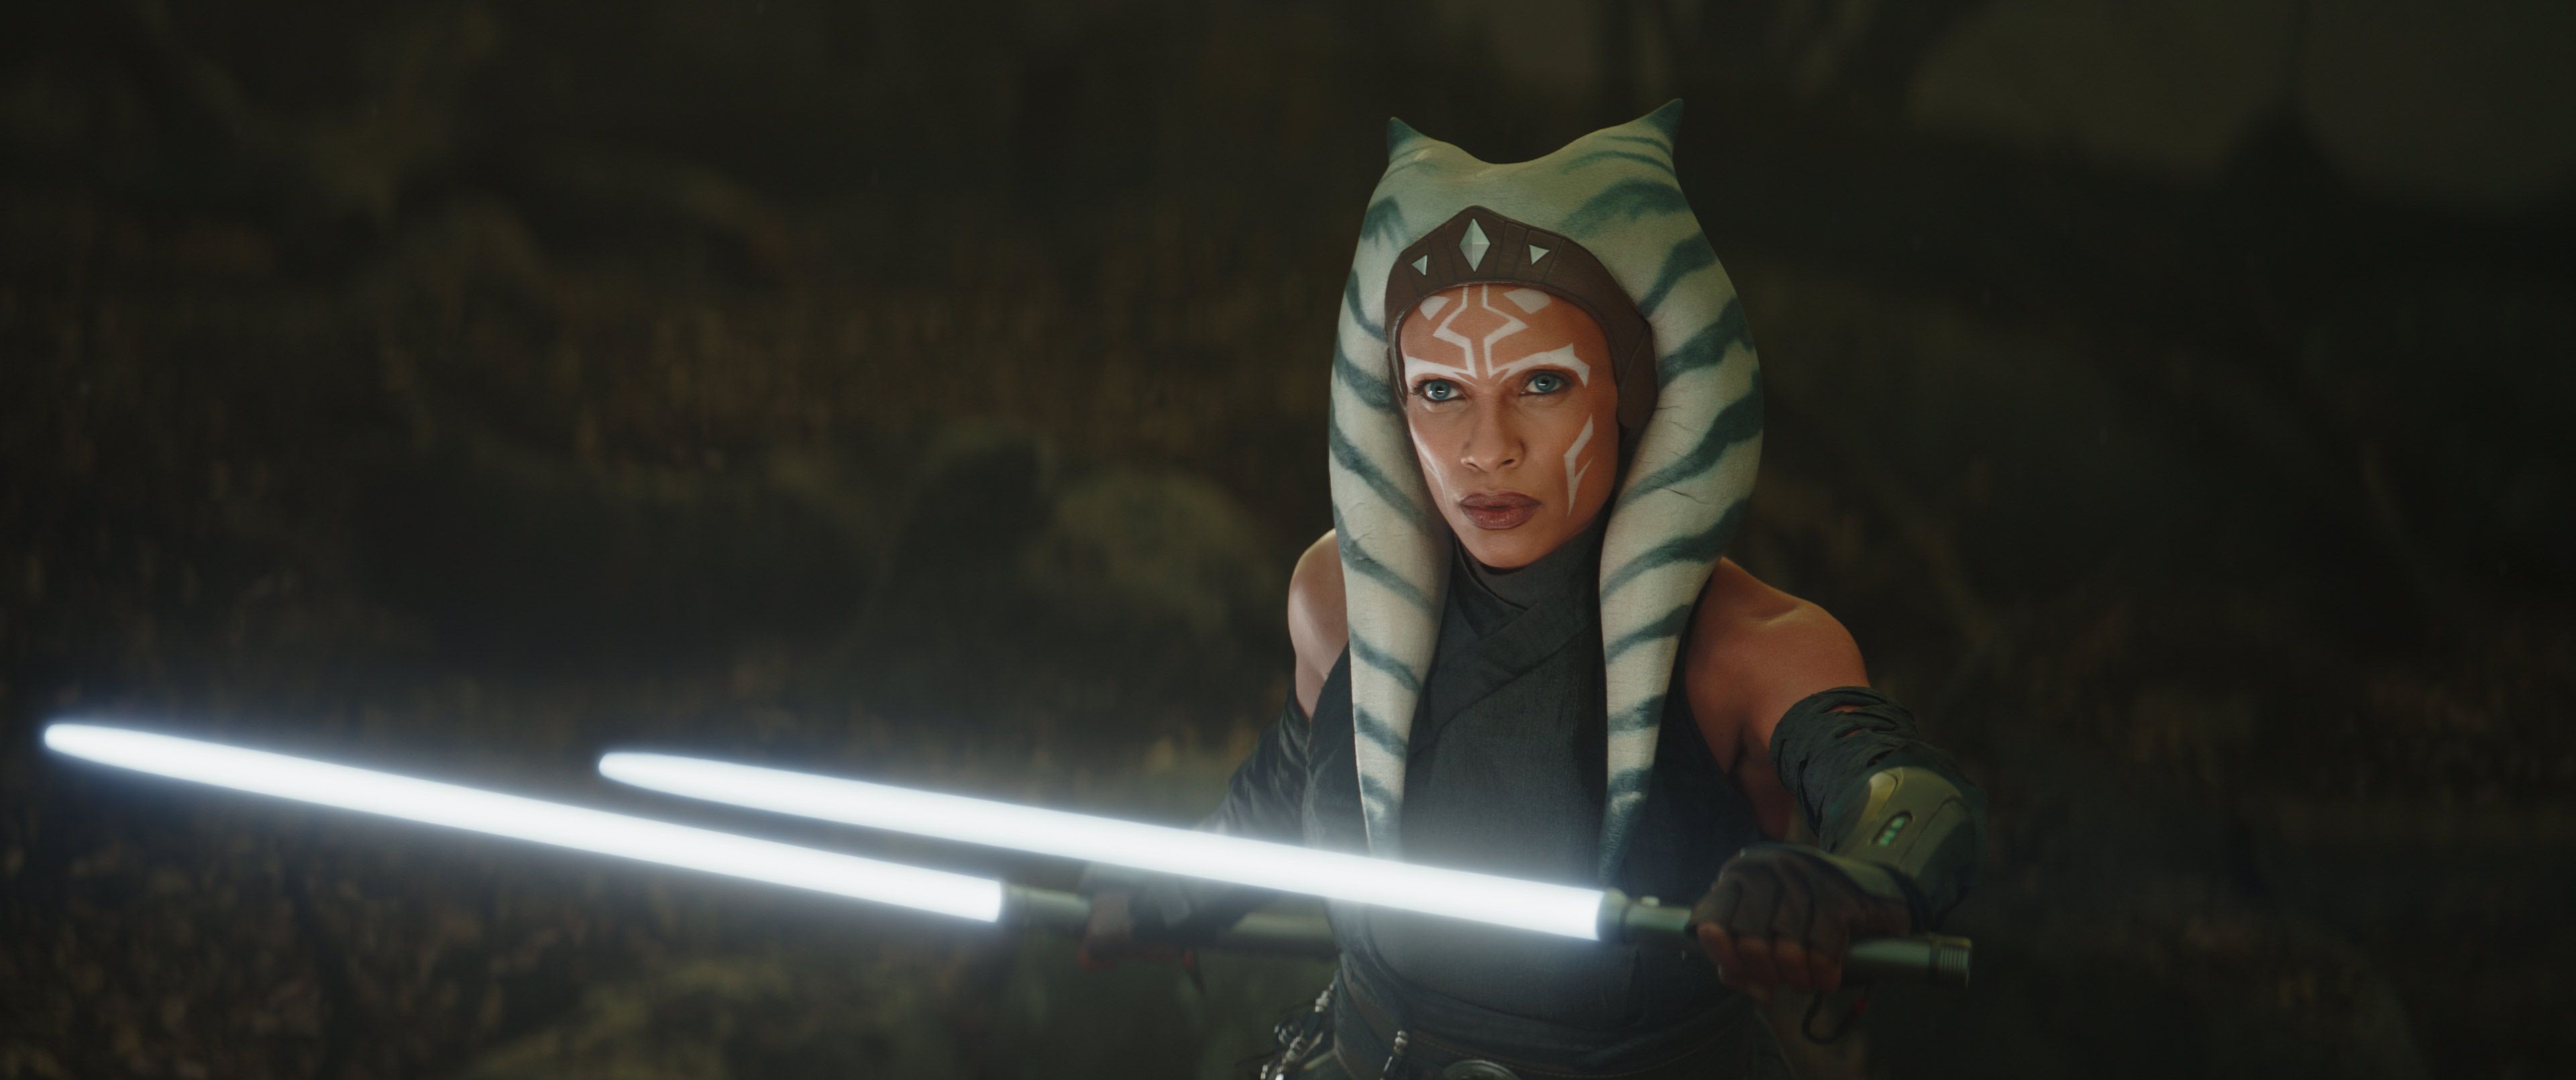 What We Know About Ahsoka: Release Date, Cast, Plot